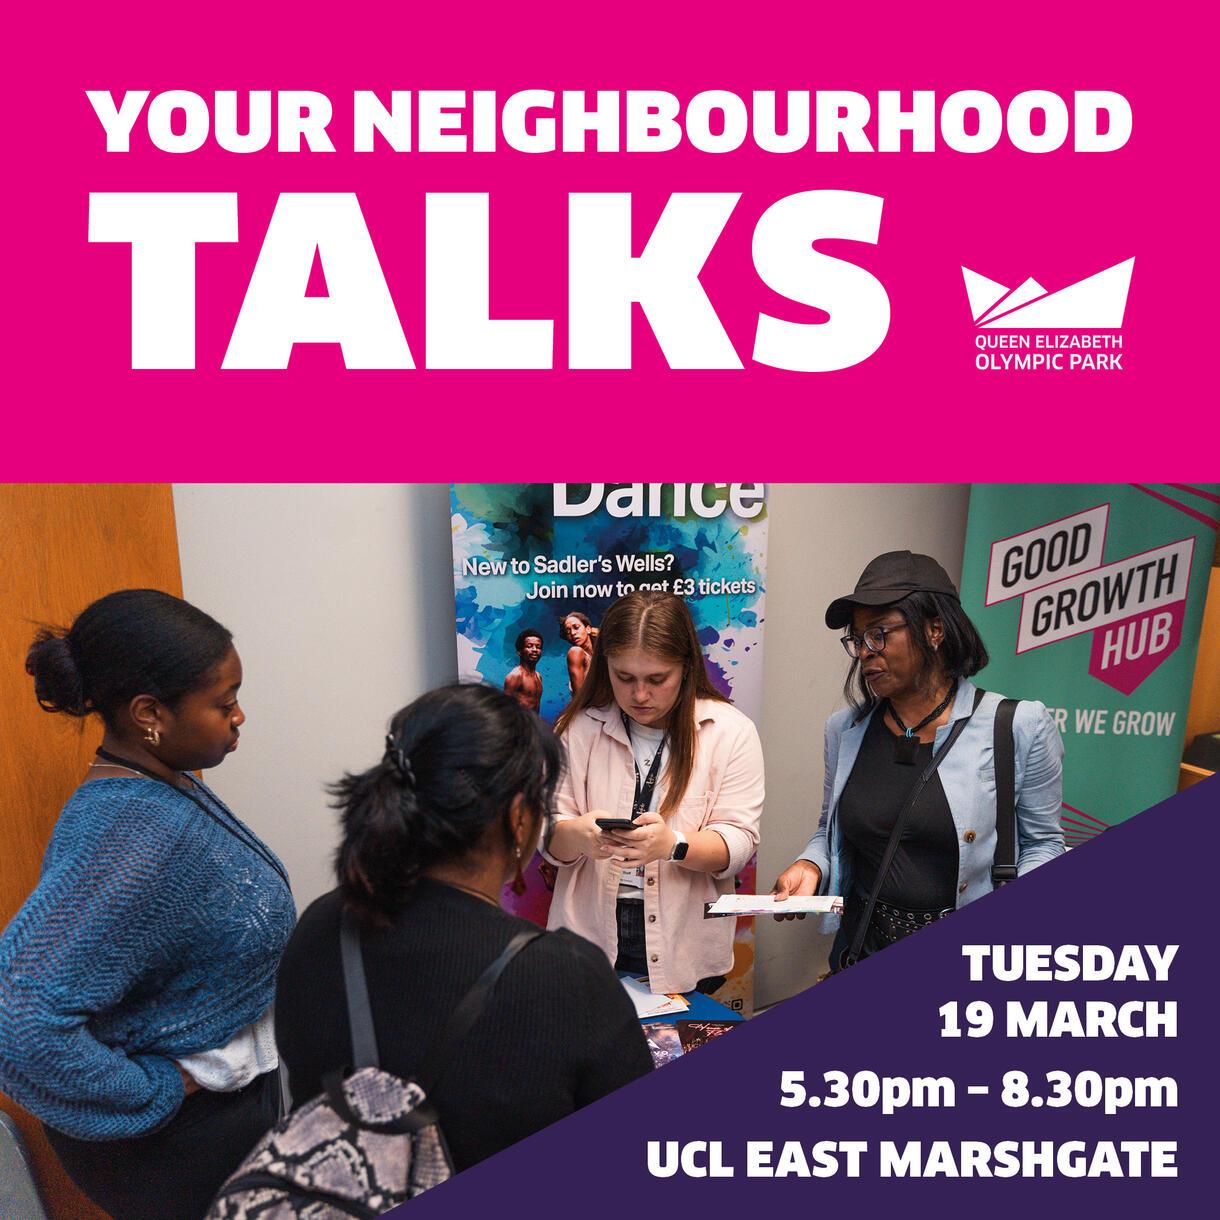 A graphic to promote Your Neighbourhood Talks on 19 March